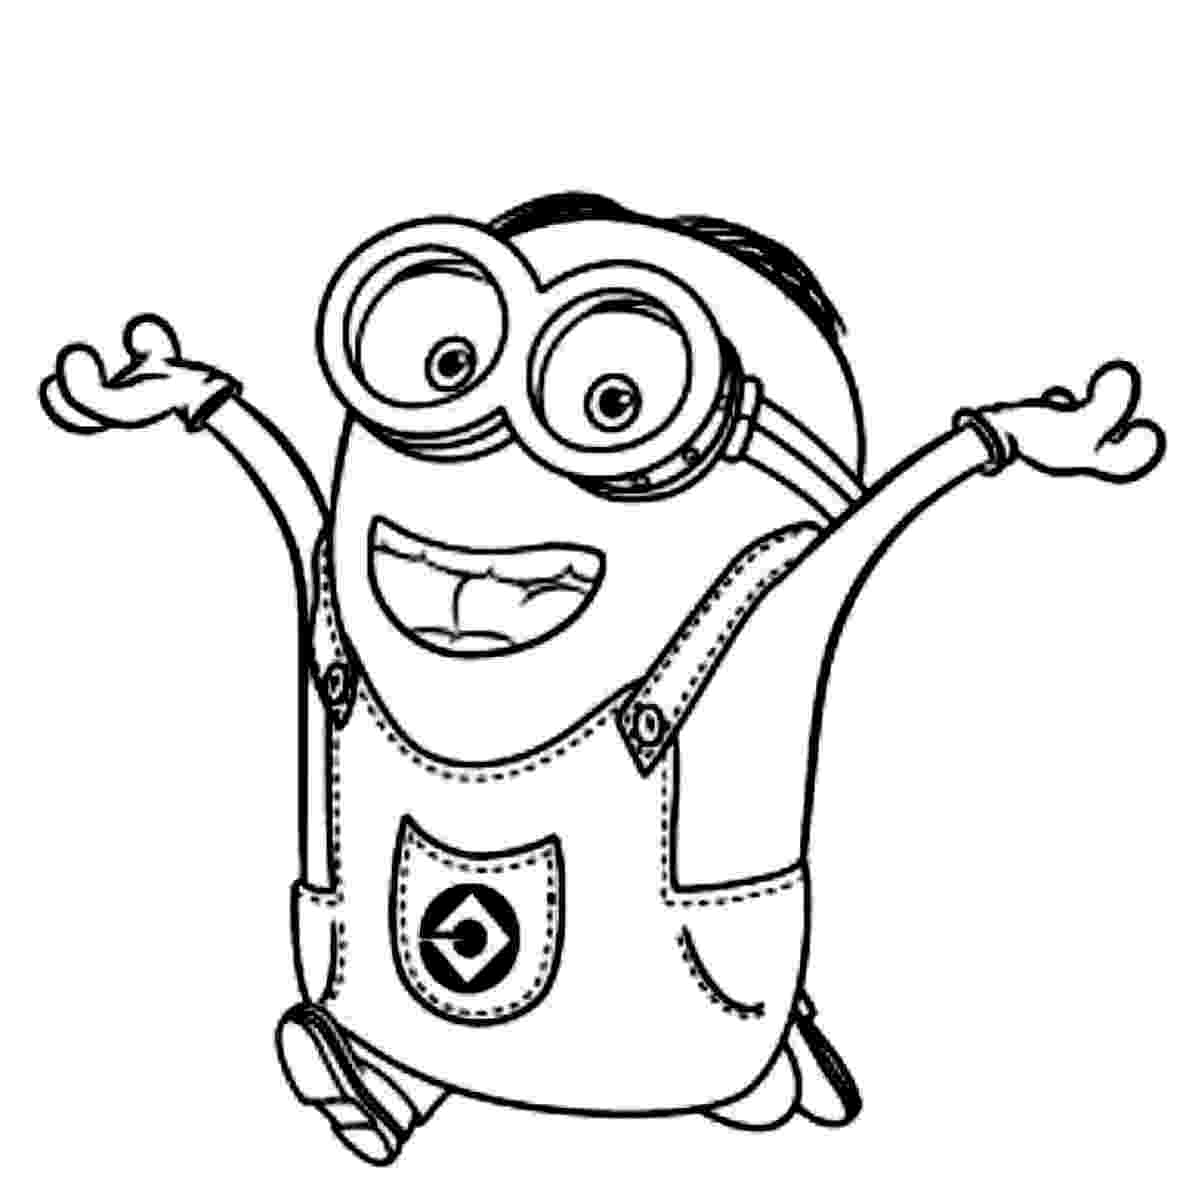 despicable me coloring pages free despicable me coloring pages to print squid army free despicable pages coloring me 